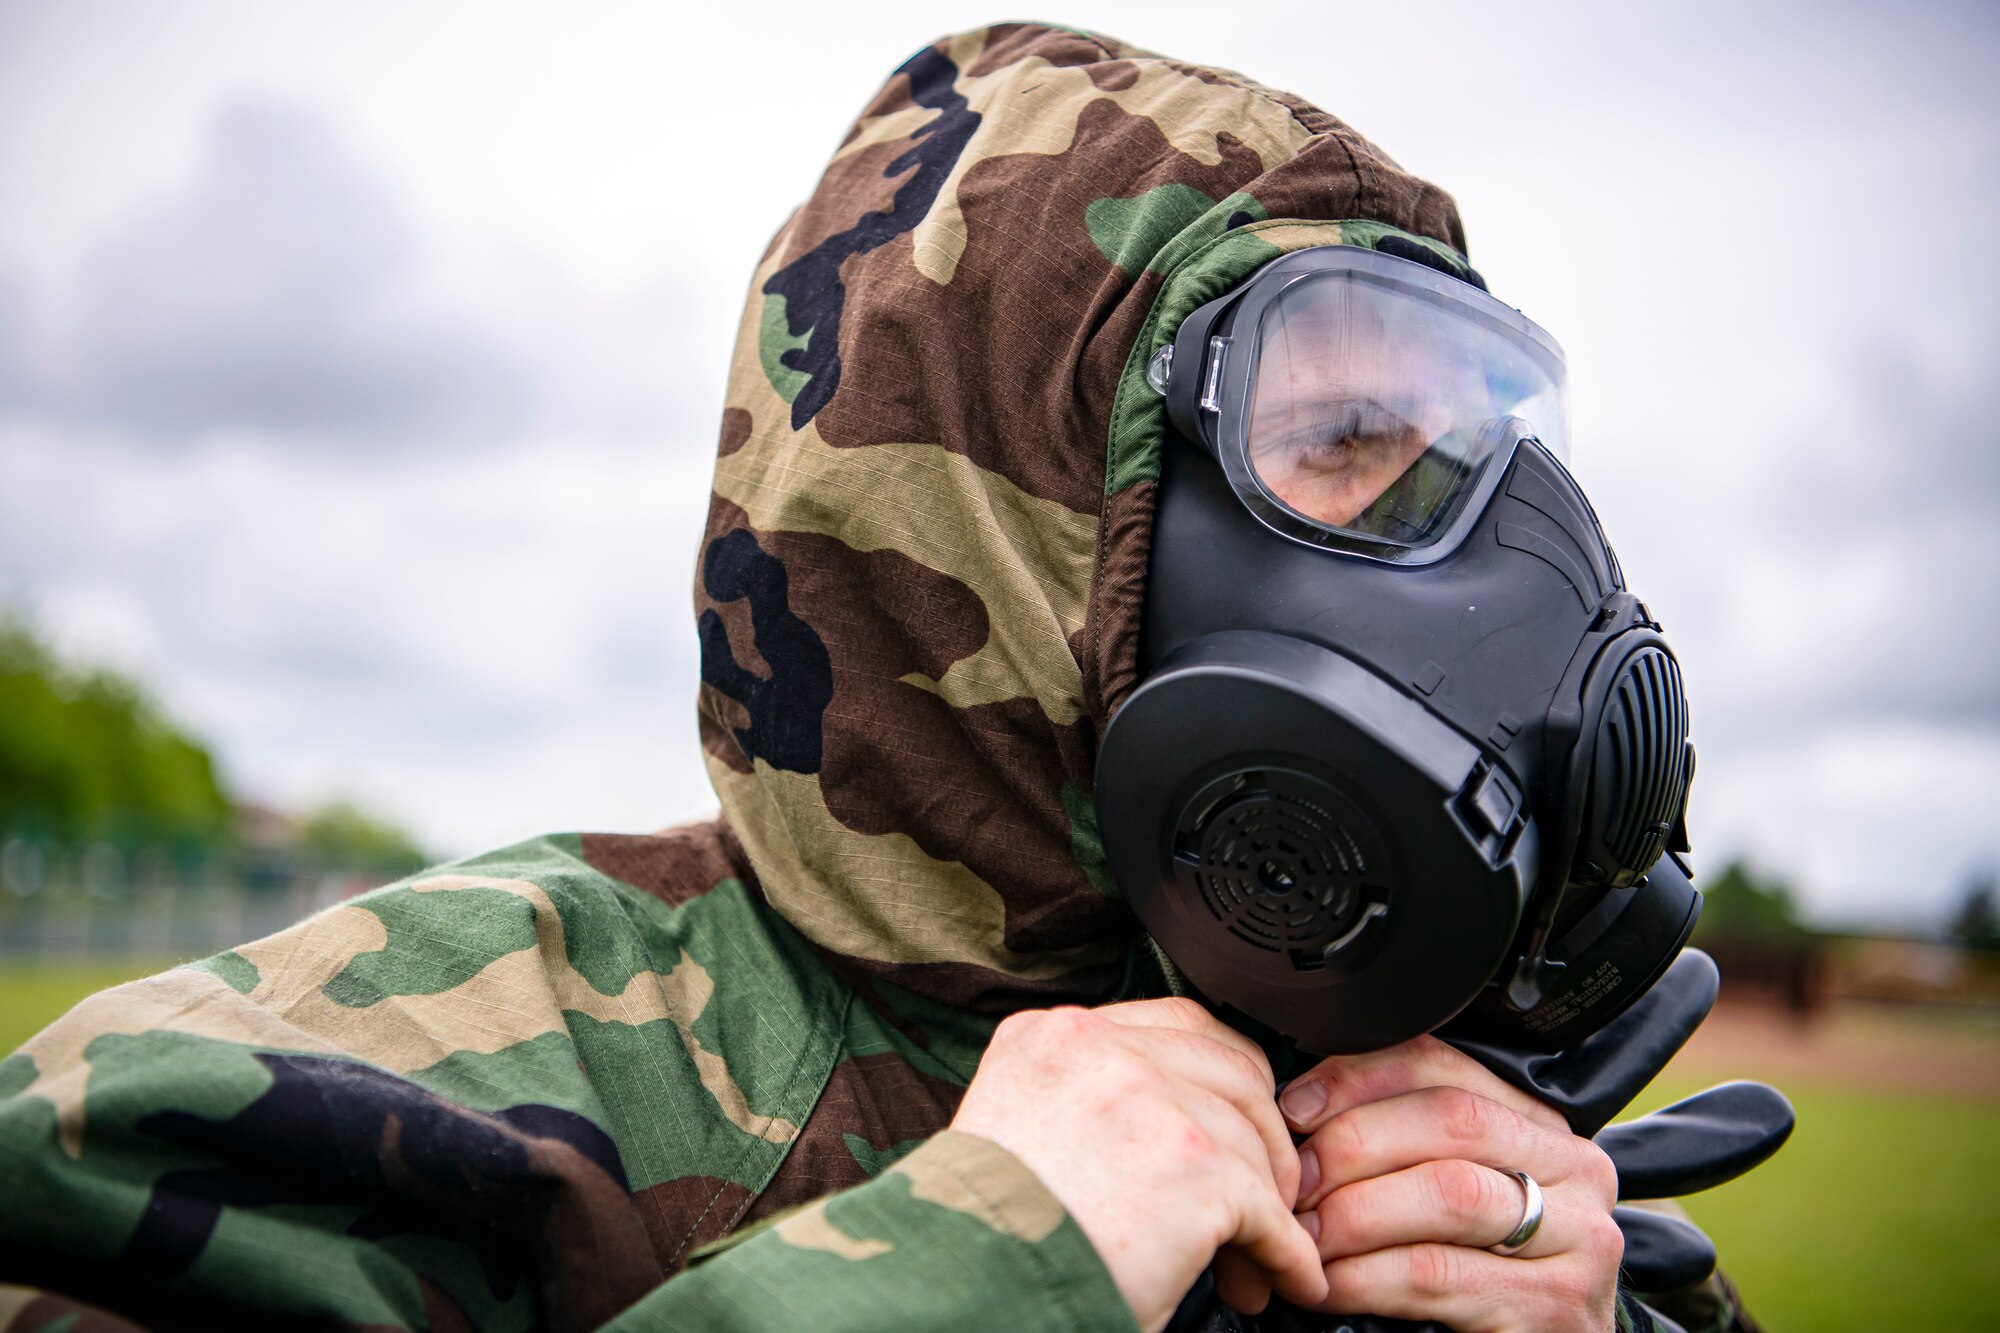 An Airman from the 423d Civil Engineer Squadron, prepares to take off his Mission Oriented Protective Posture gear following an exercise at RAF Alconbury, England, May 19, 2022. The exercise was geared towards training Airmen on how to properly control and examine a contaminated area after a simulated chemical attack while in Mission Oriented Protective Posture Gear. (U.S. Air Force photo by Staff Sgt. Eugene Oliver)